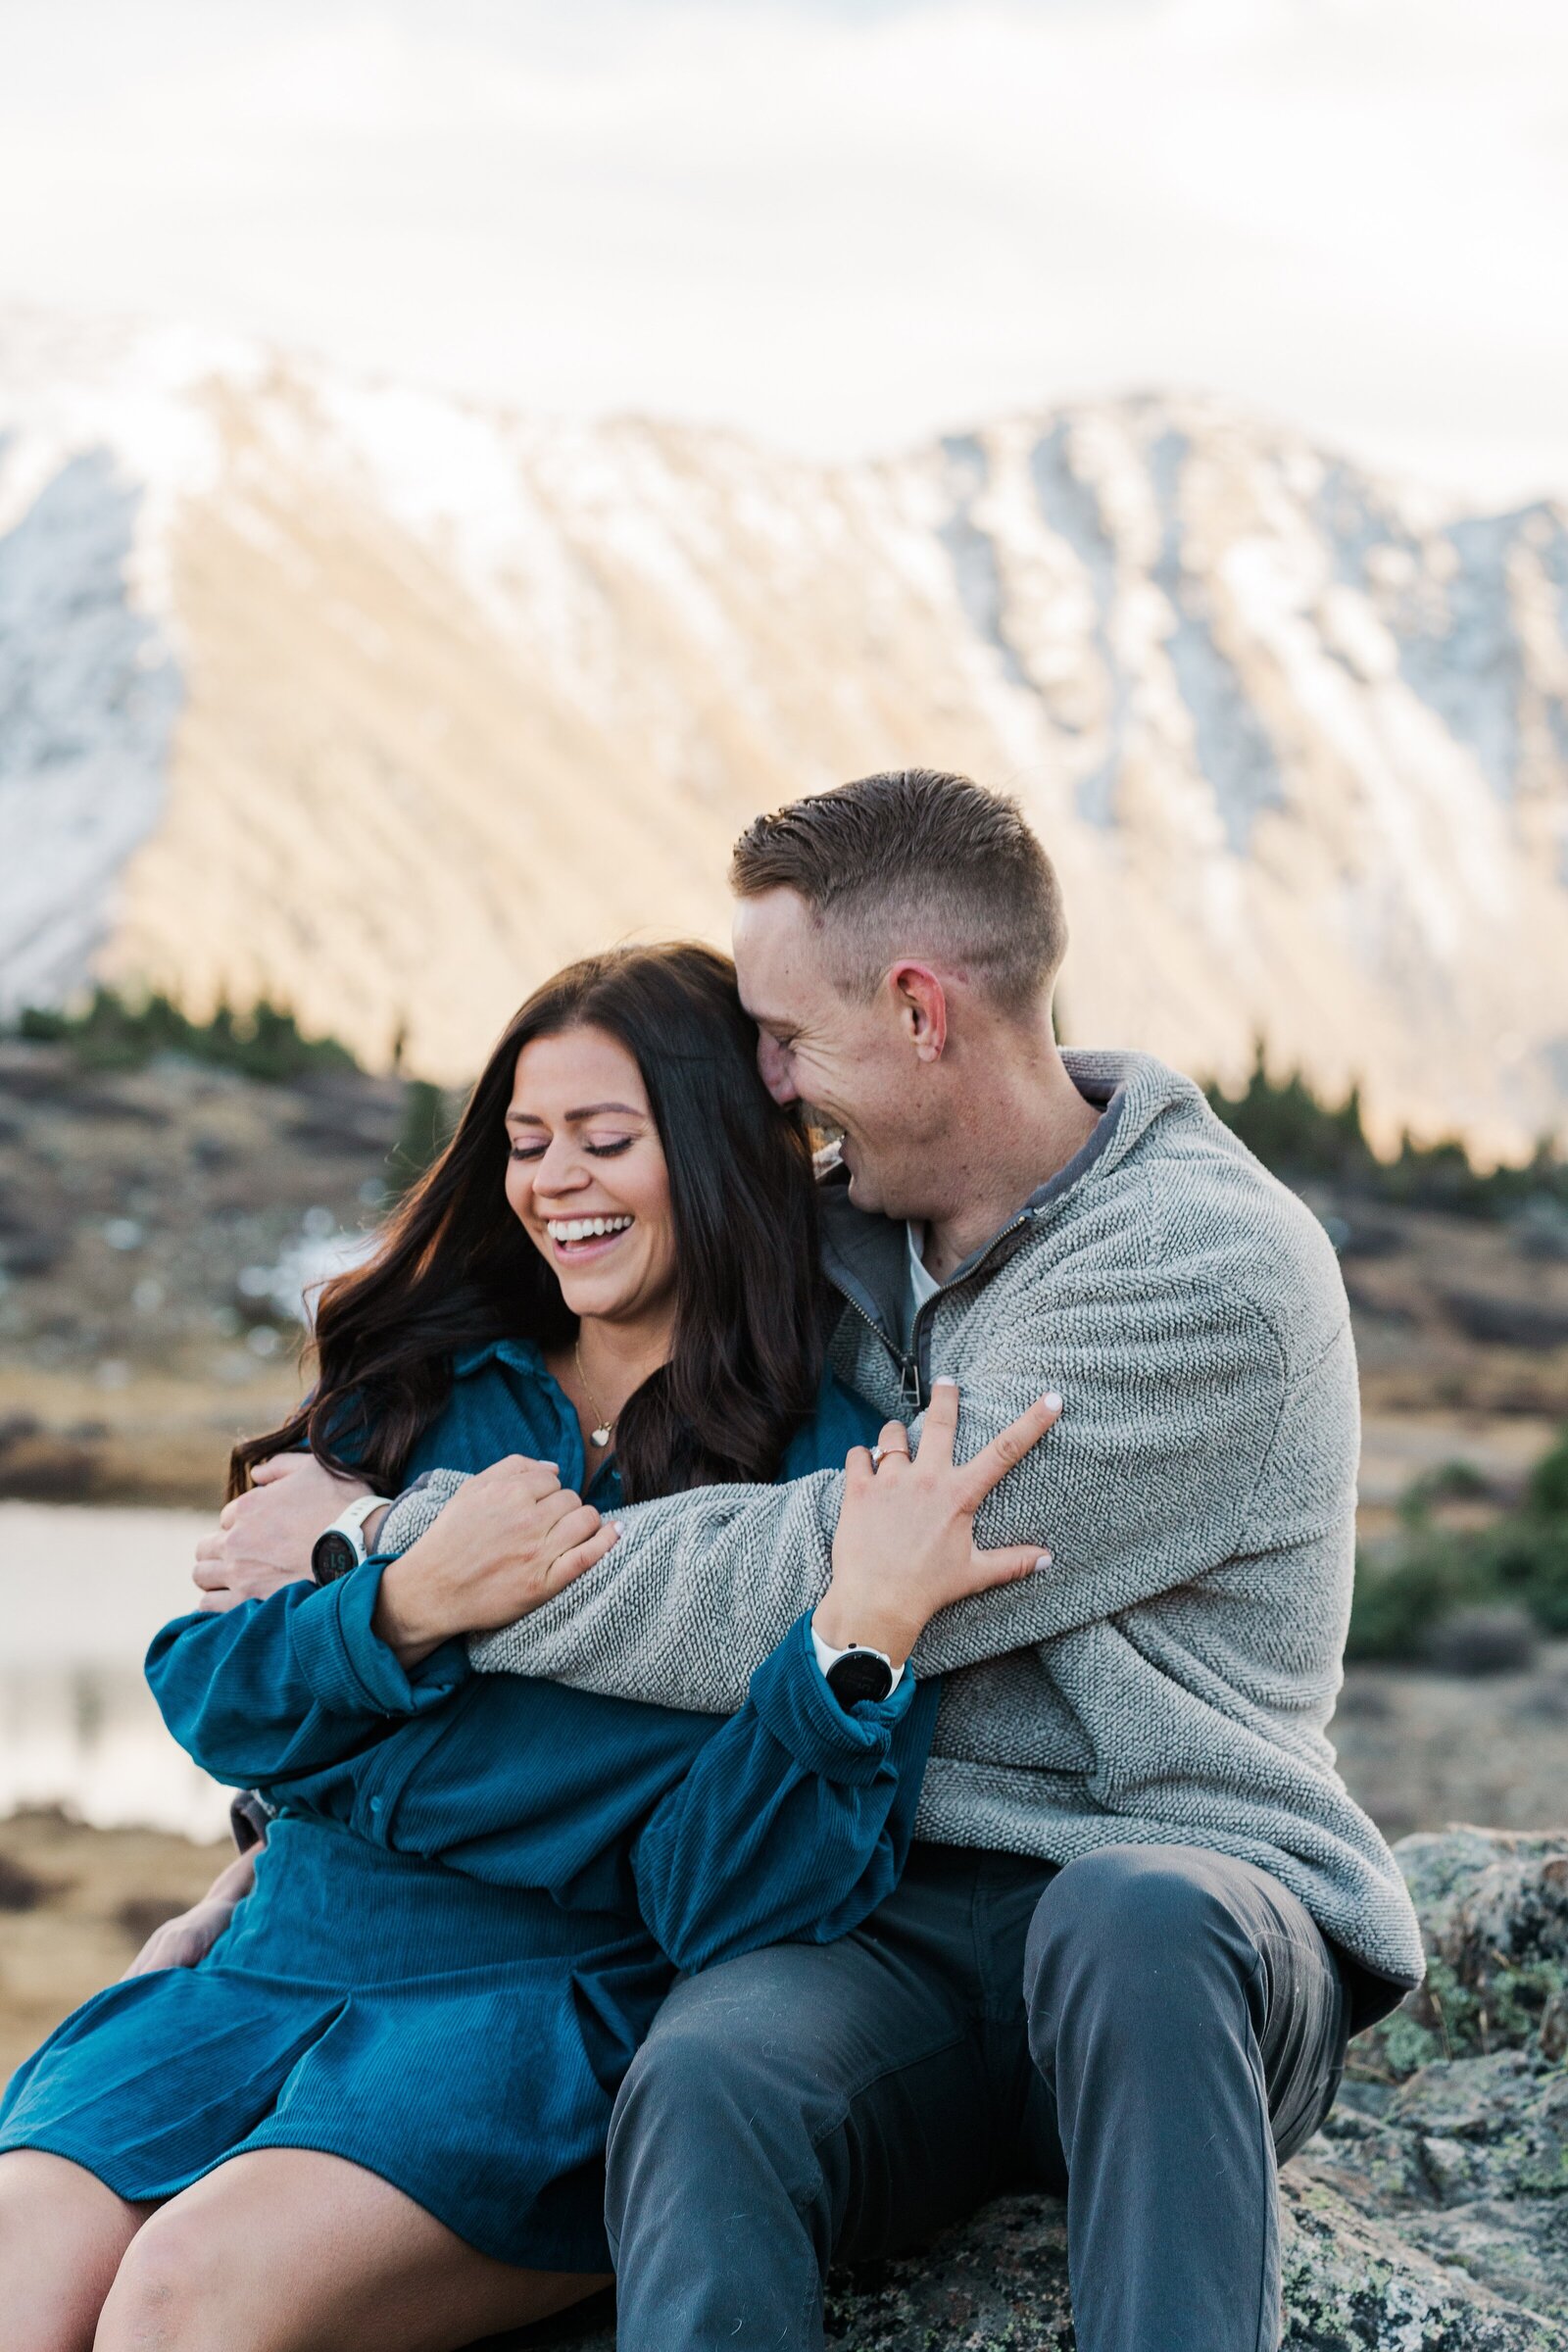 Candid engagement photography captures the joy, adventure, and beauty of your love story in a natural and authentic way. Samantha Immer's playful and adventurous approach makes for unforgettable images.